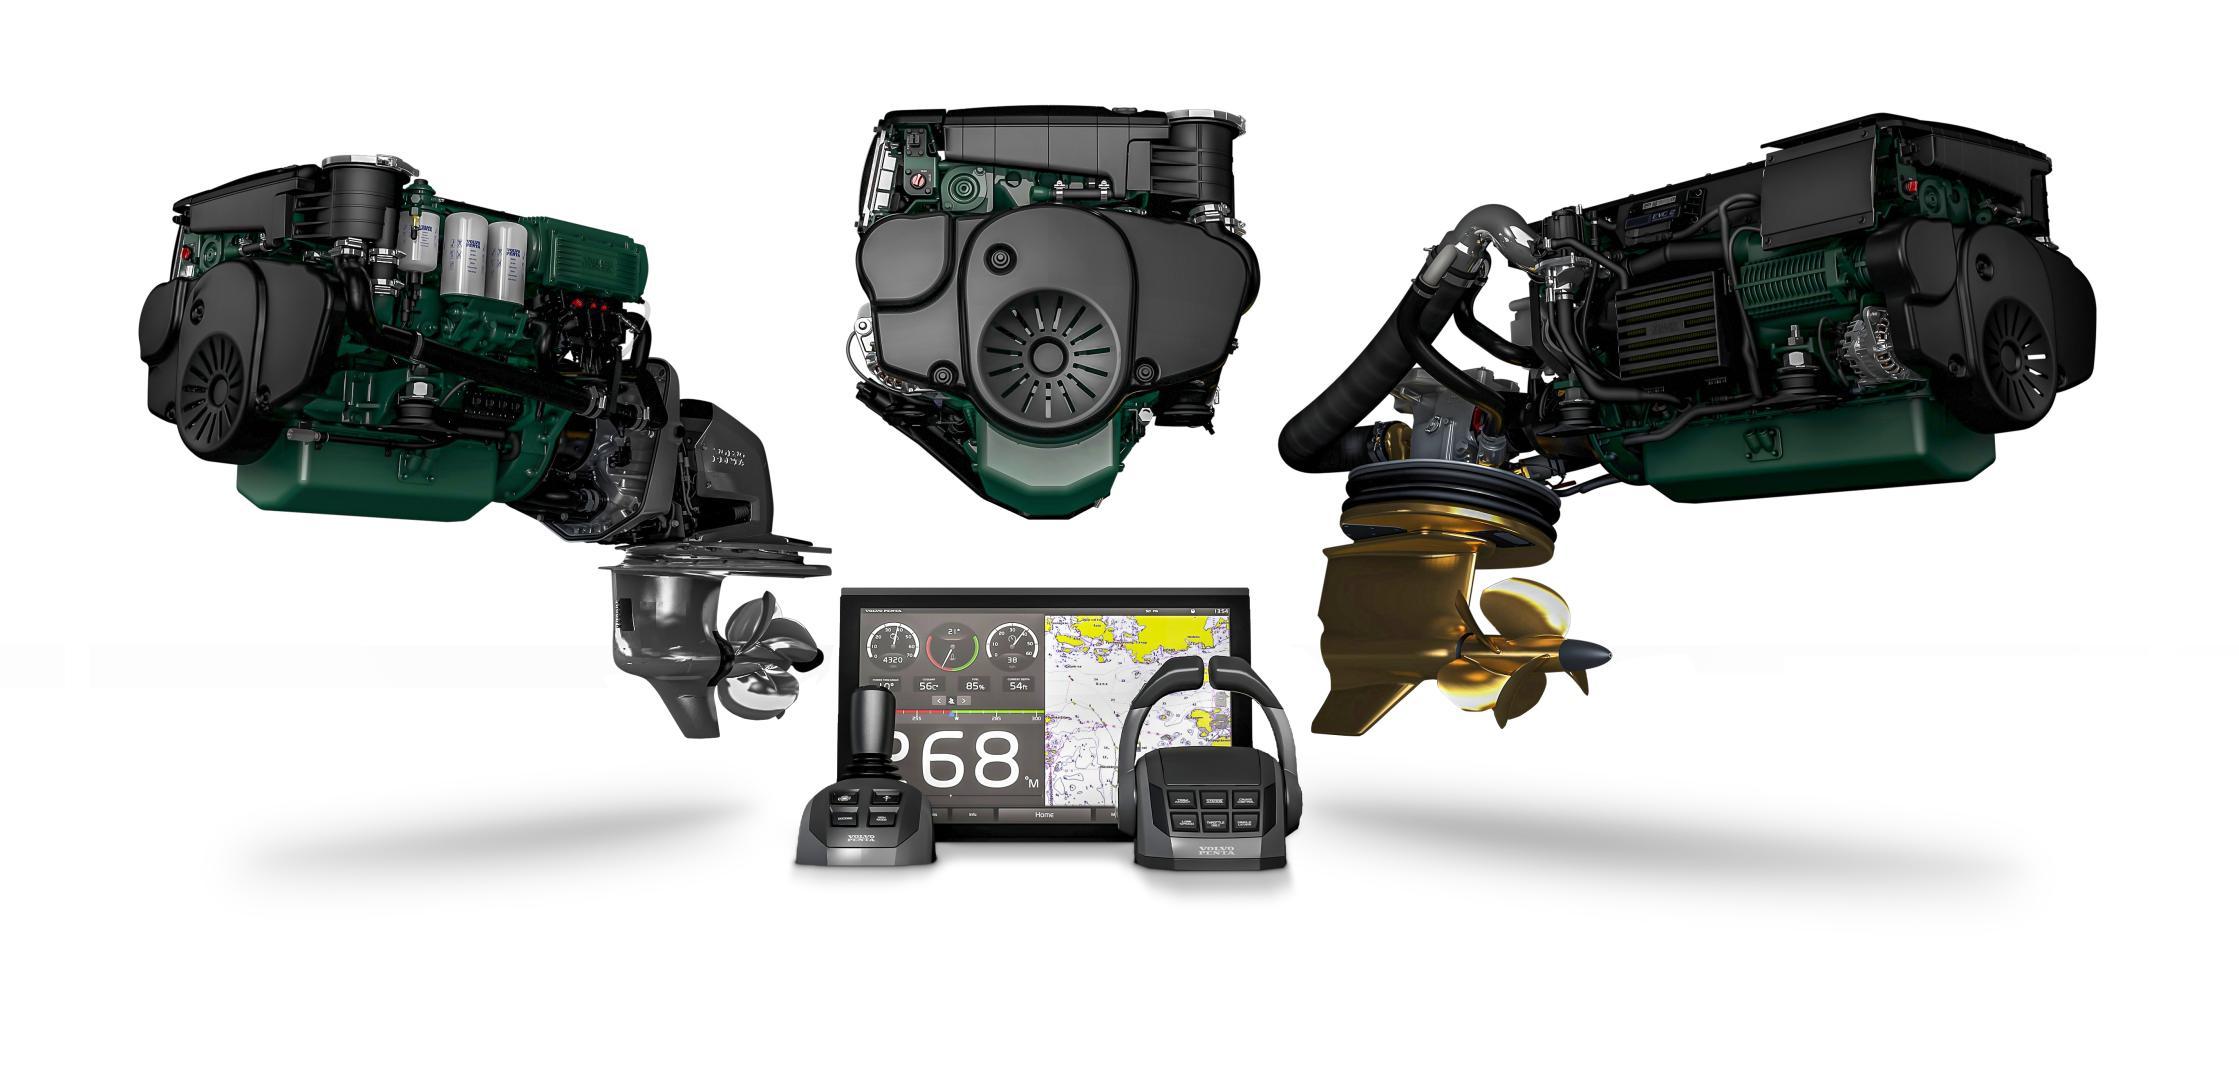 Volvo Penta D4 and D6 Marine Propulsion Systems